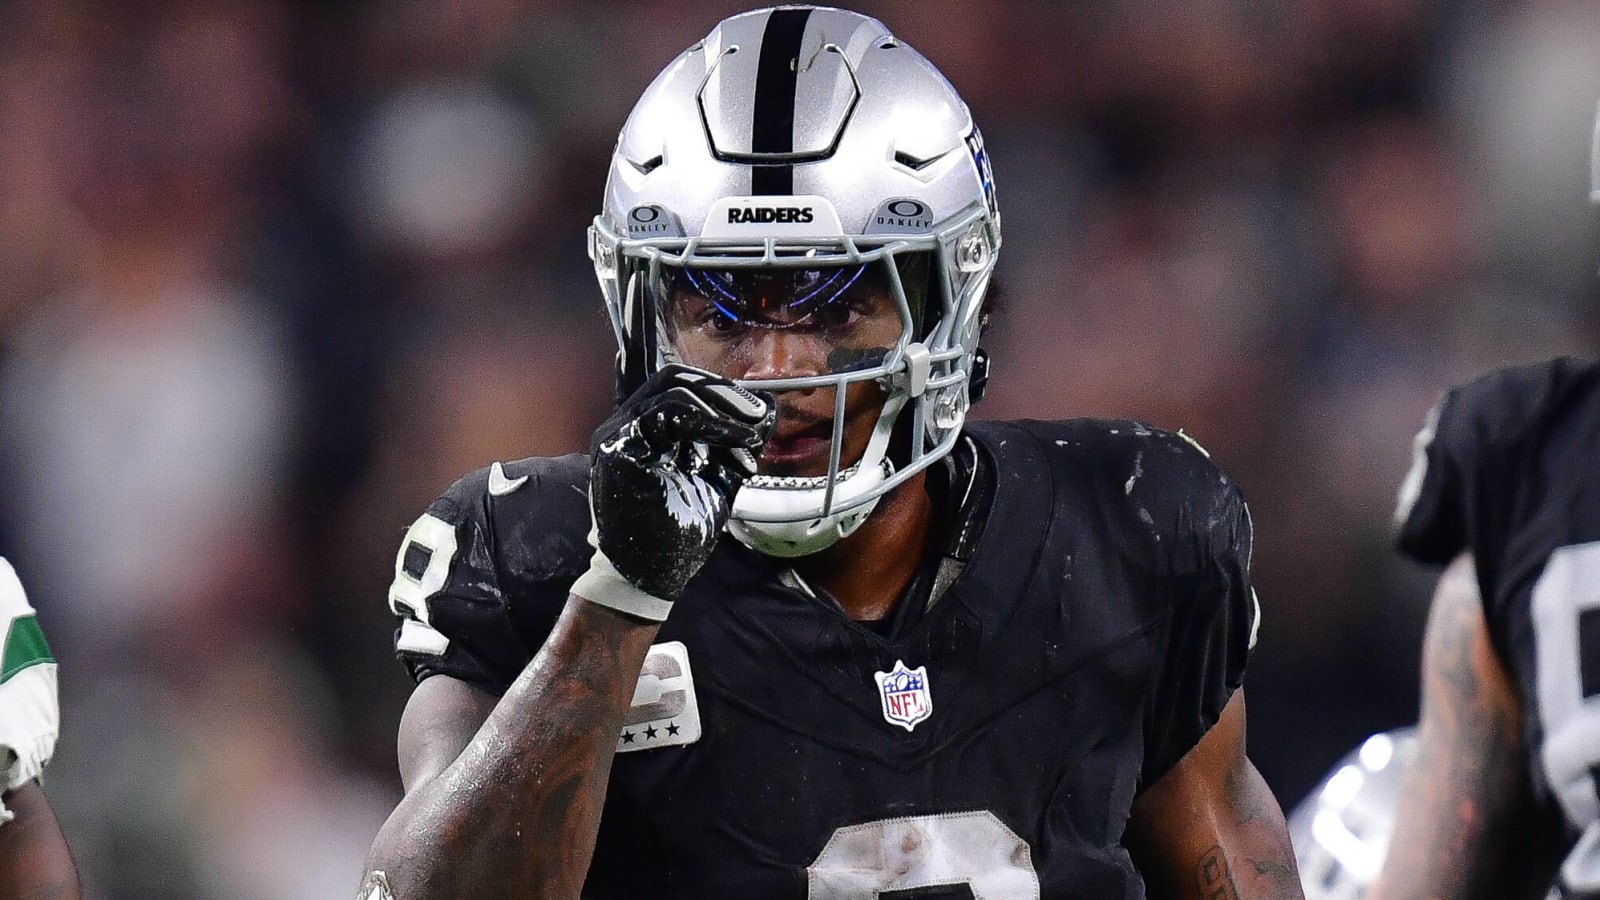 Dallas Cowboys named ideal landing spot for Raiders offensive star